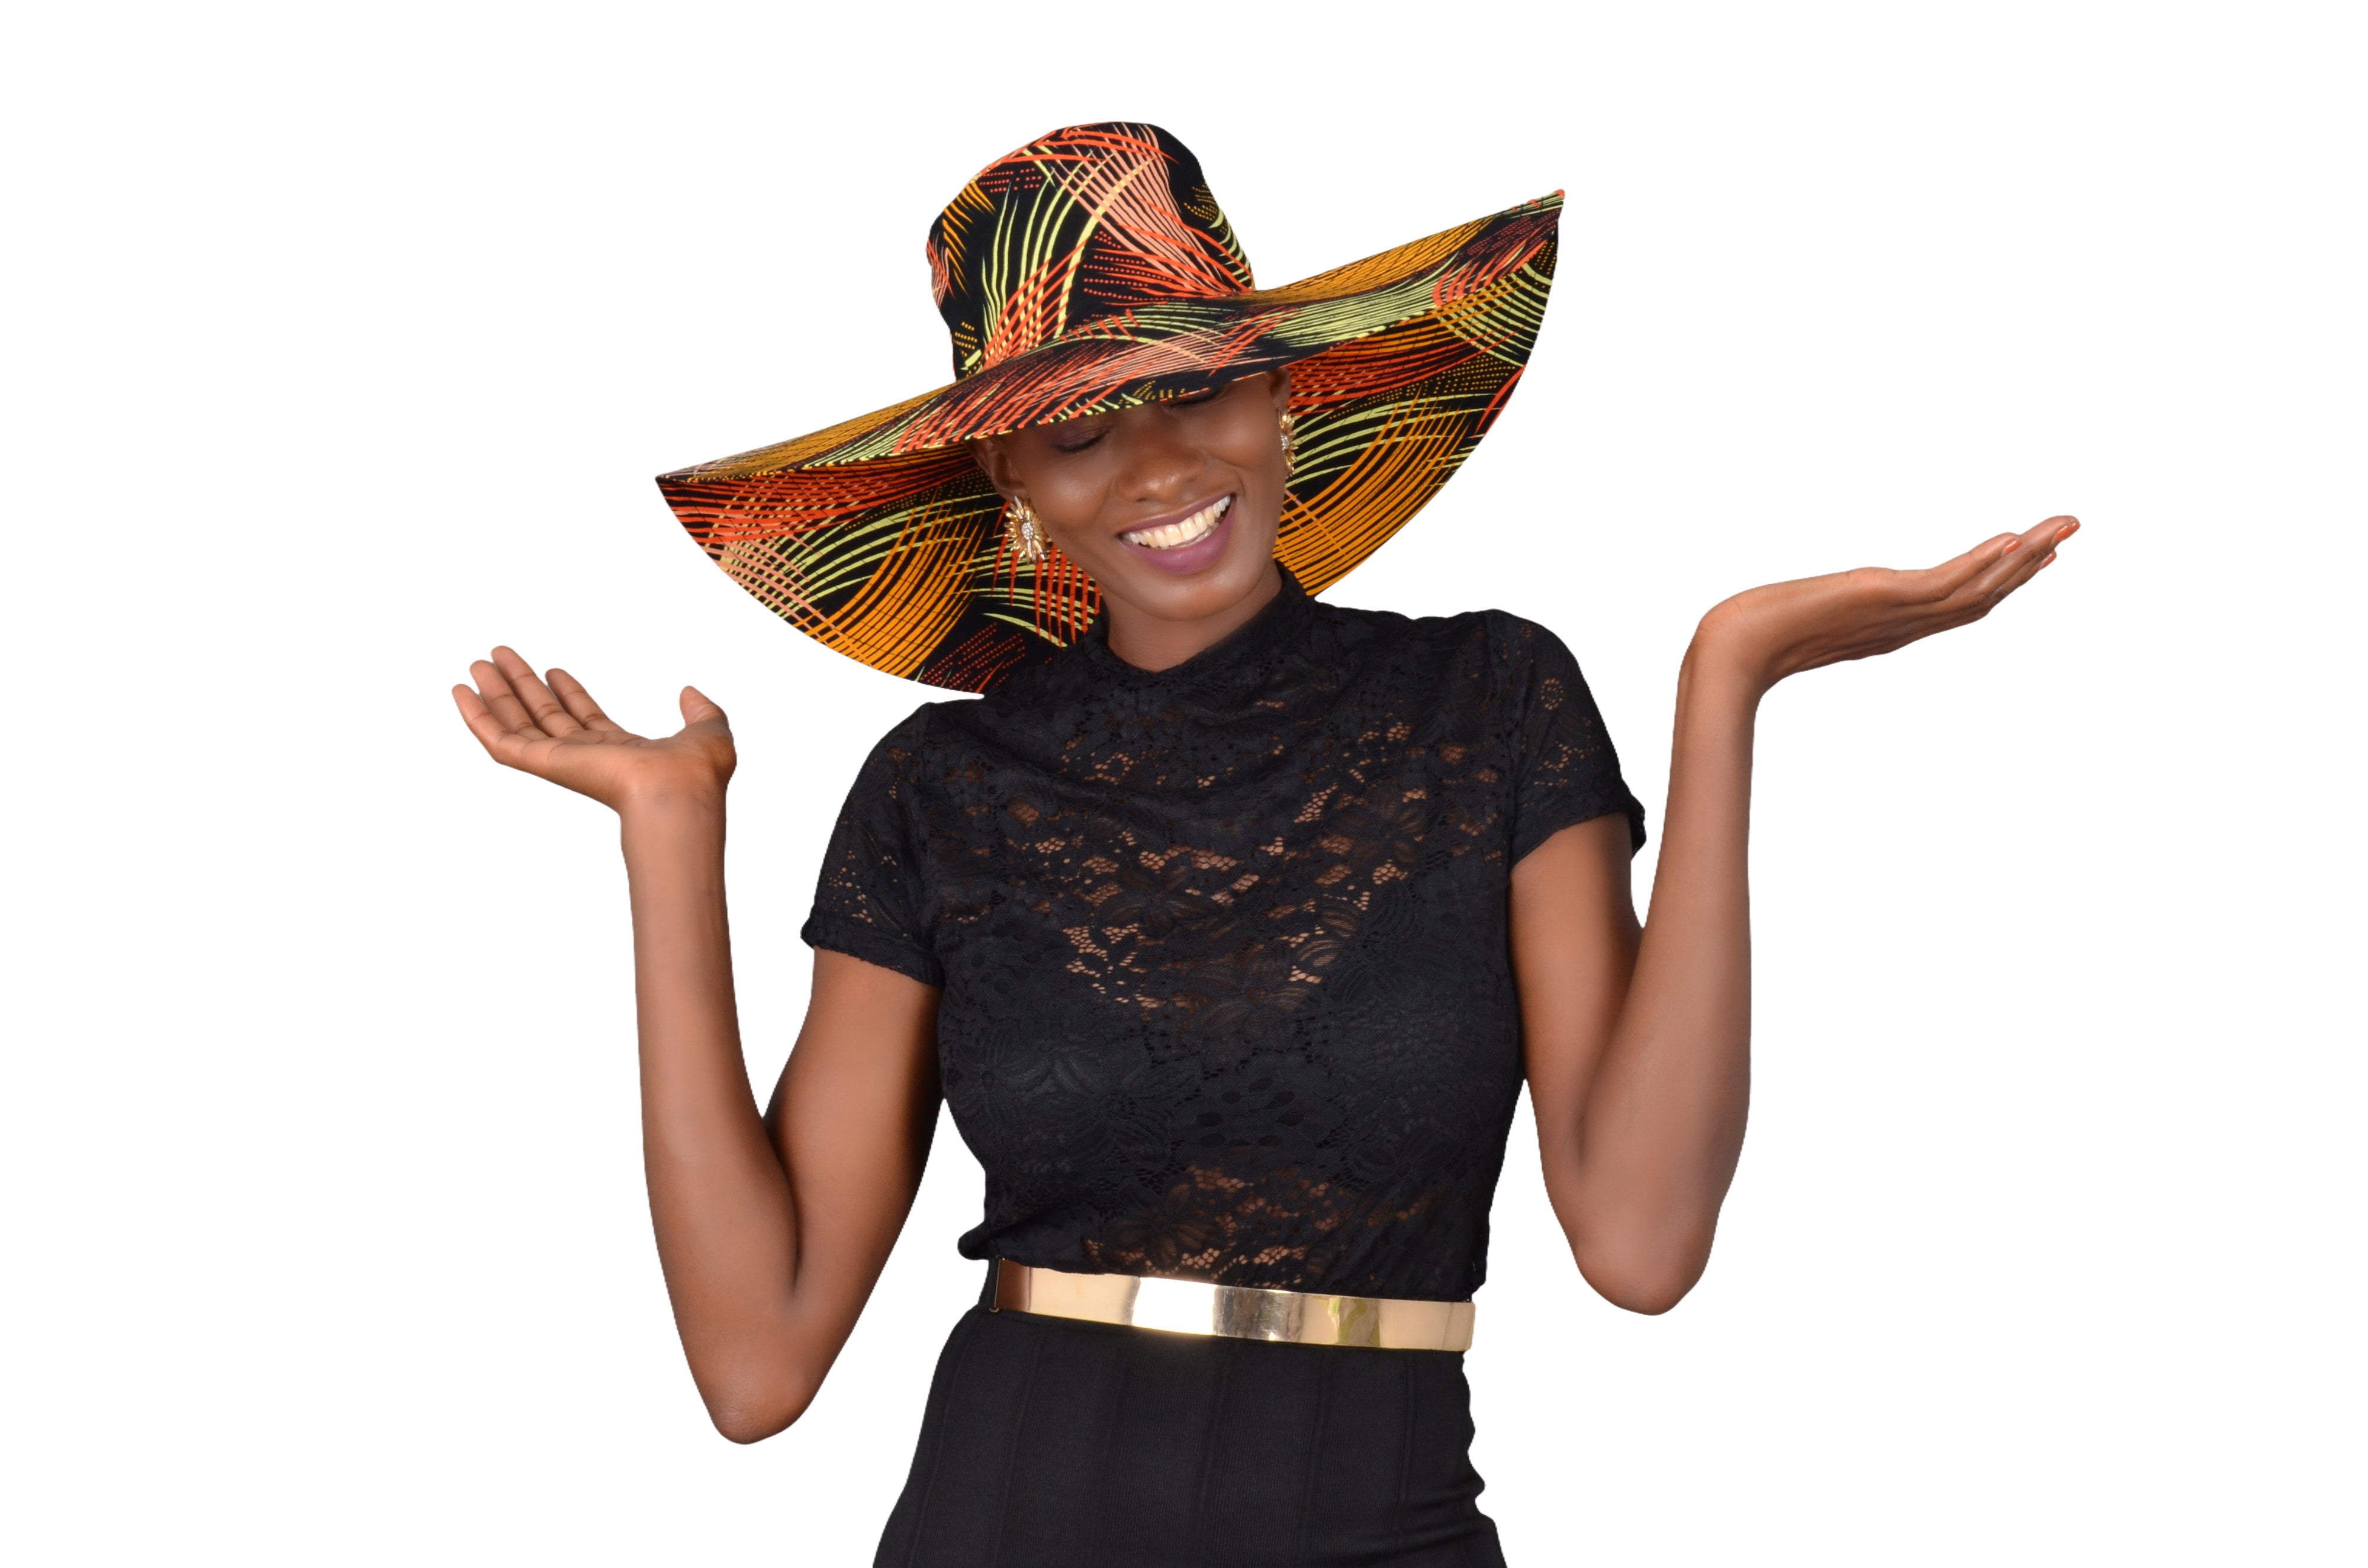 Jollo Nyasi Modern African Hat: let comfort and style give you the best shade.